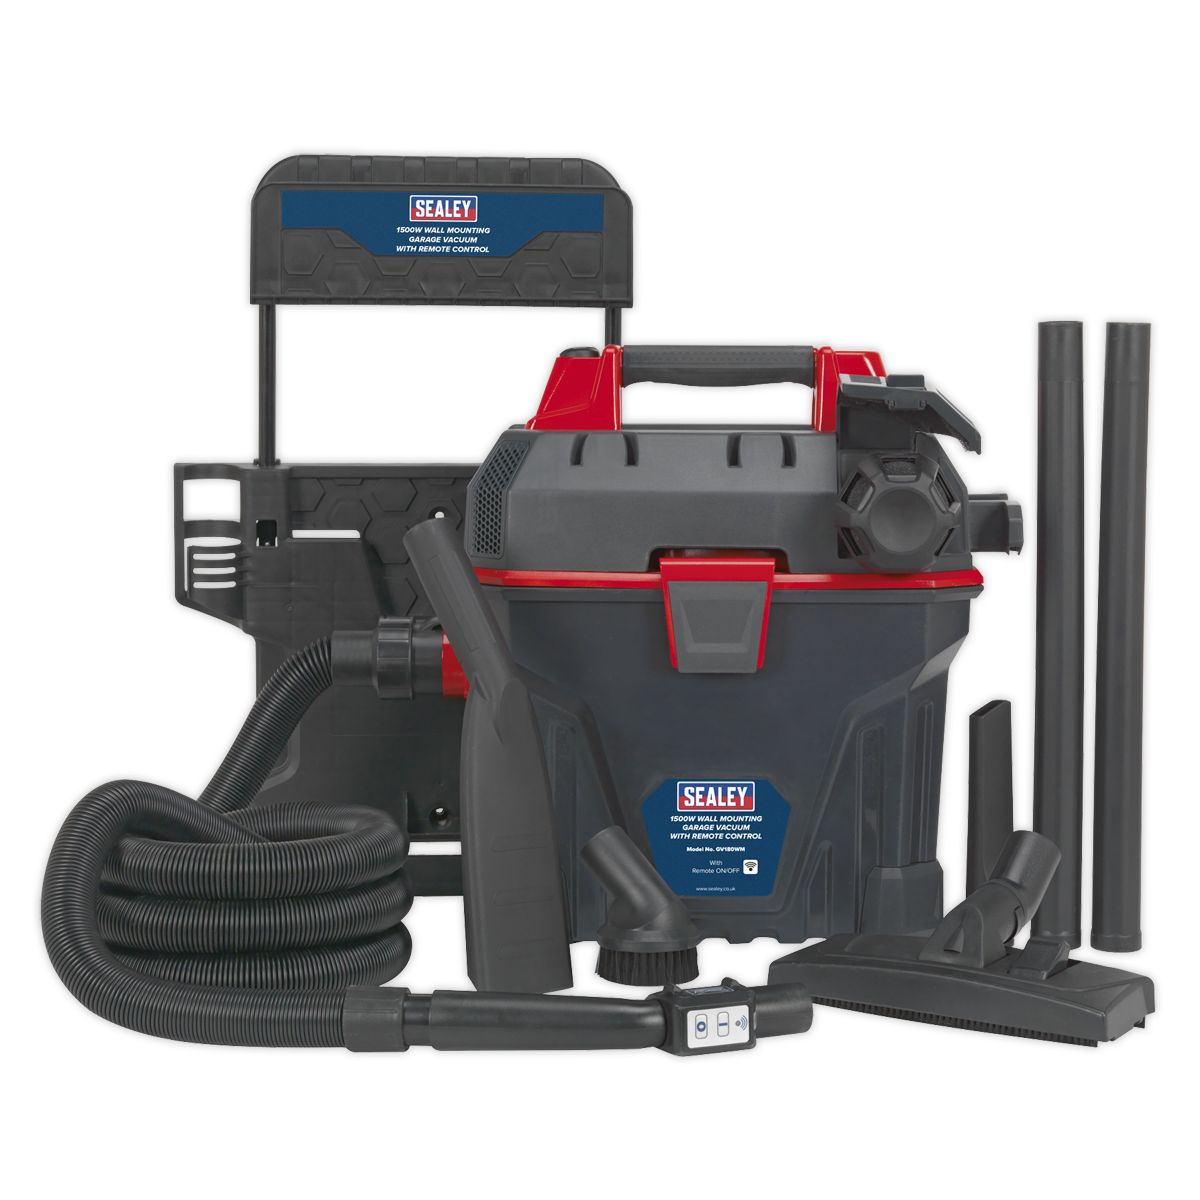 Sealey GV180WM Wall Mounted Garage Vacuum with Remote Control